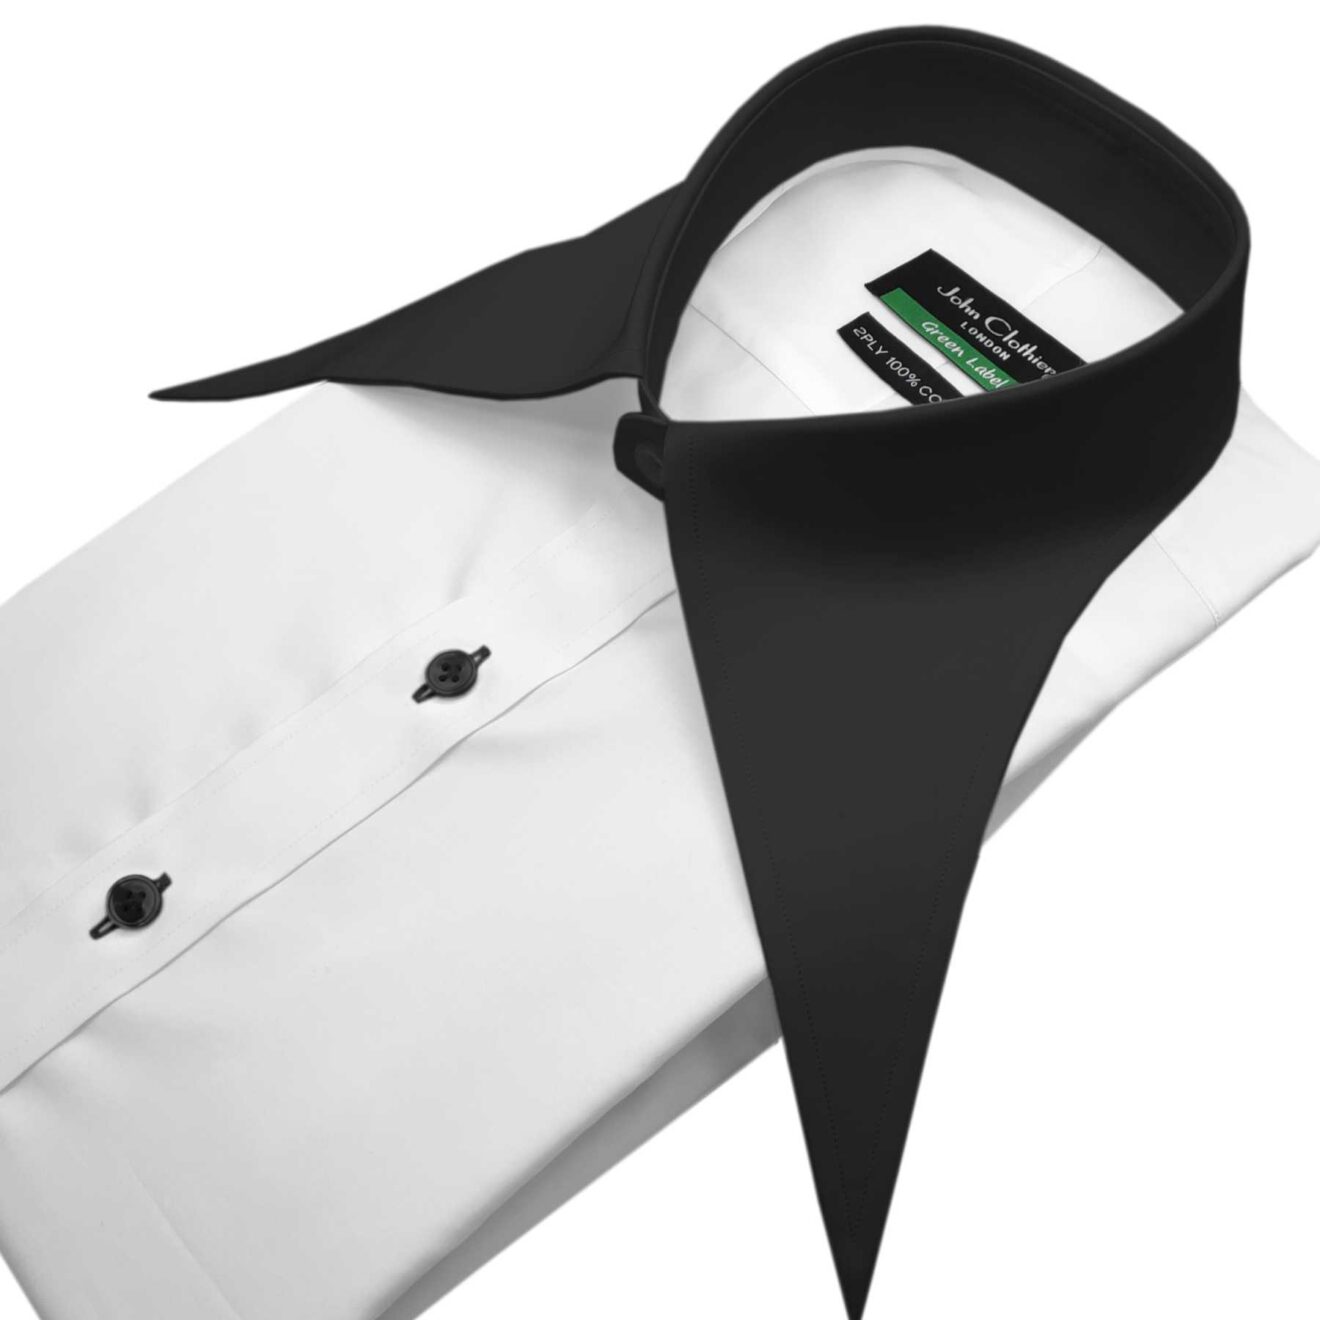 White Extreme Spearpoint Collar Contrast Buttons Shirt- John Clothier ...